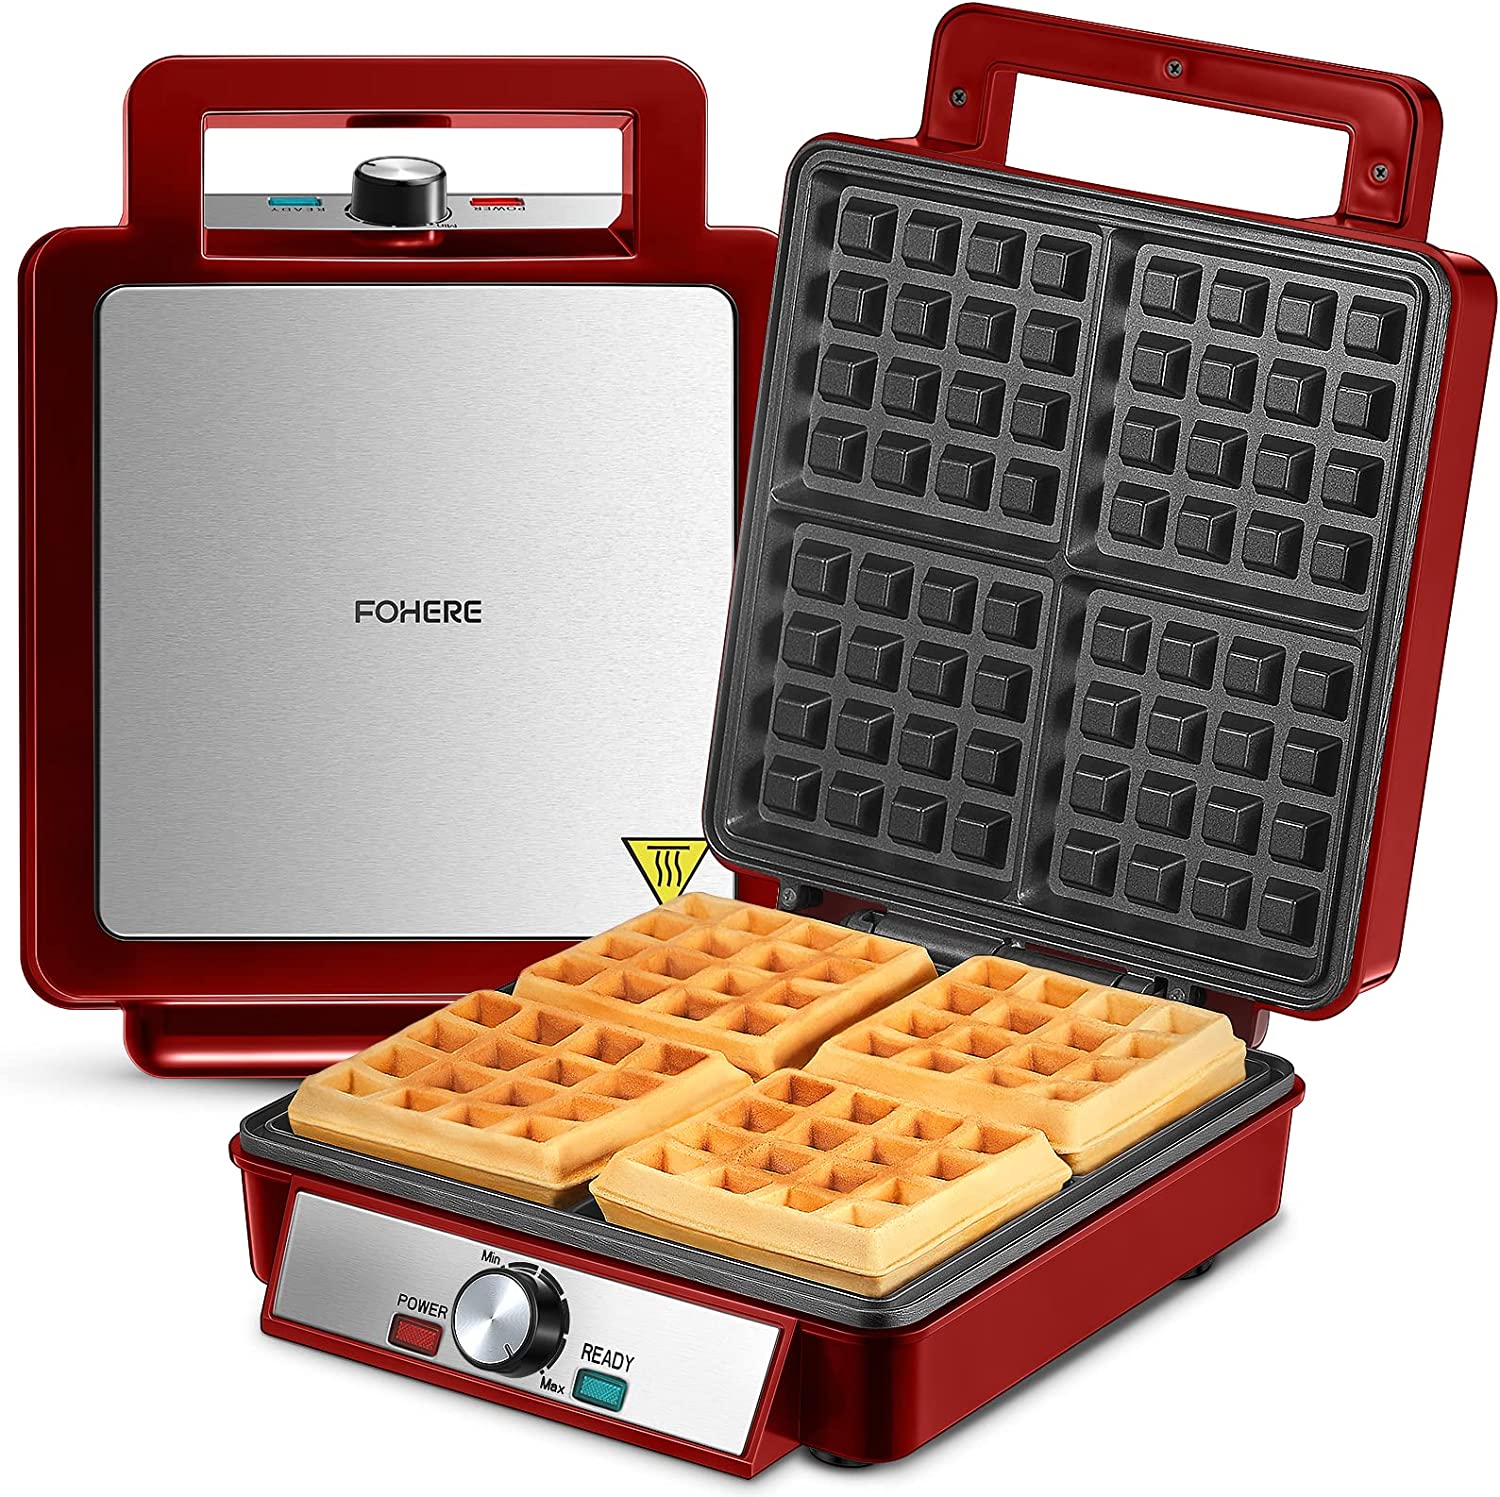 FOHERE Waffle iron, 1200 W Belgian waffle iron with non-stick coating and easy to clean, adjustable temperature, stainless steel, insulated handle, waffle machine for 4 waffles